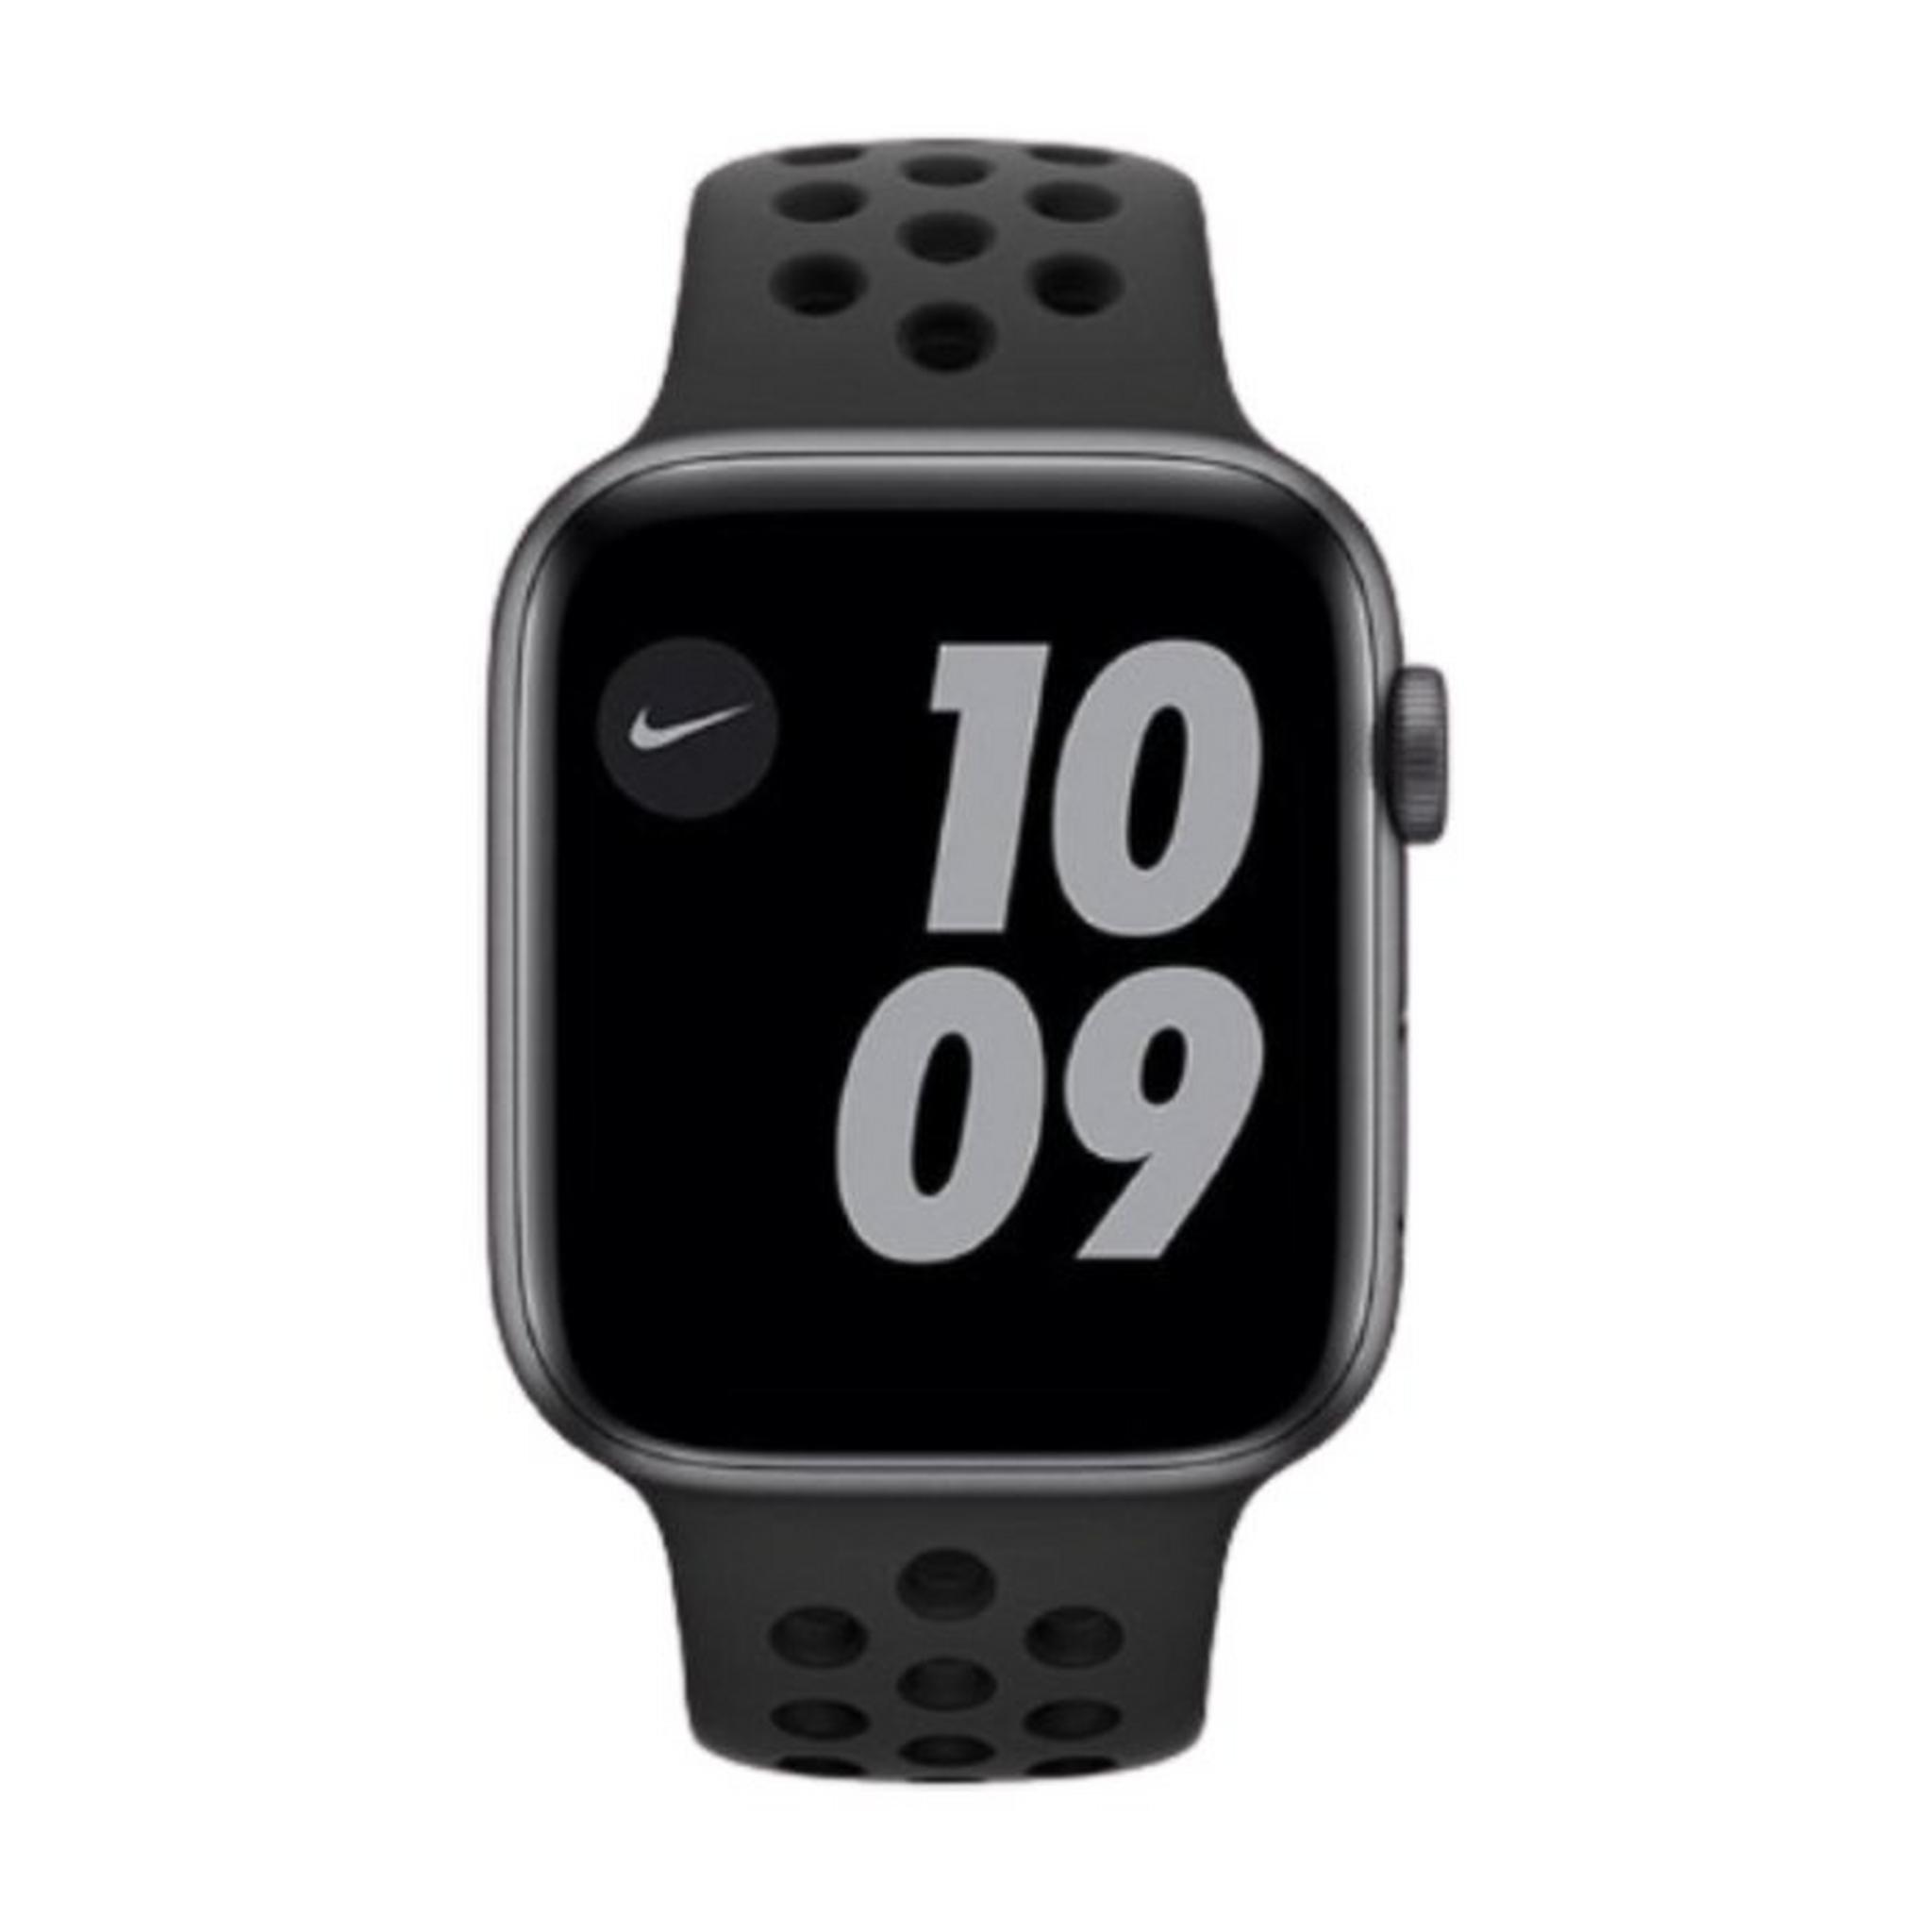 Apple Watch Nike Series 6 GPS 40mm Aluminum Case Smart Watch - Space Gray / Anthracite Black